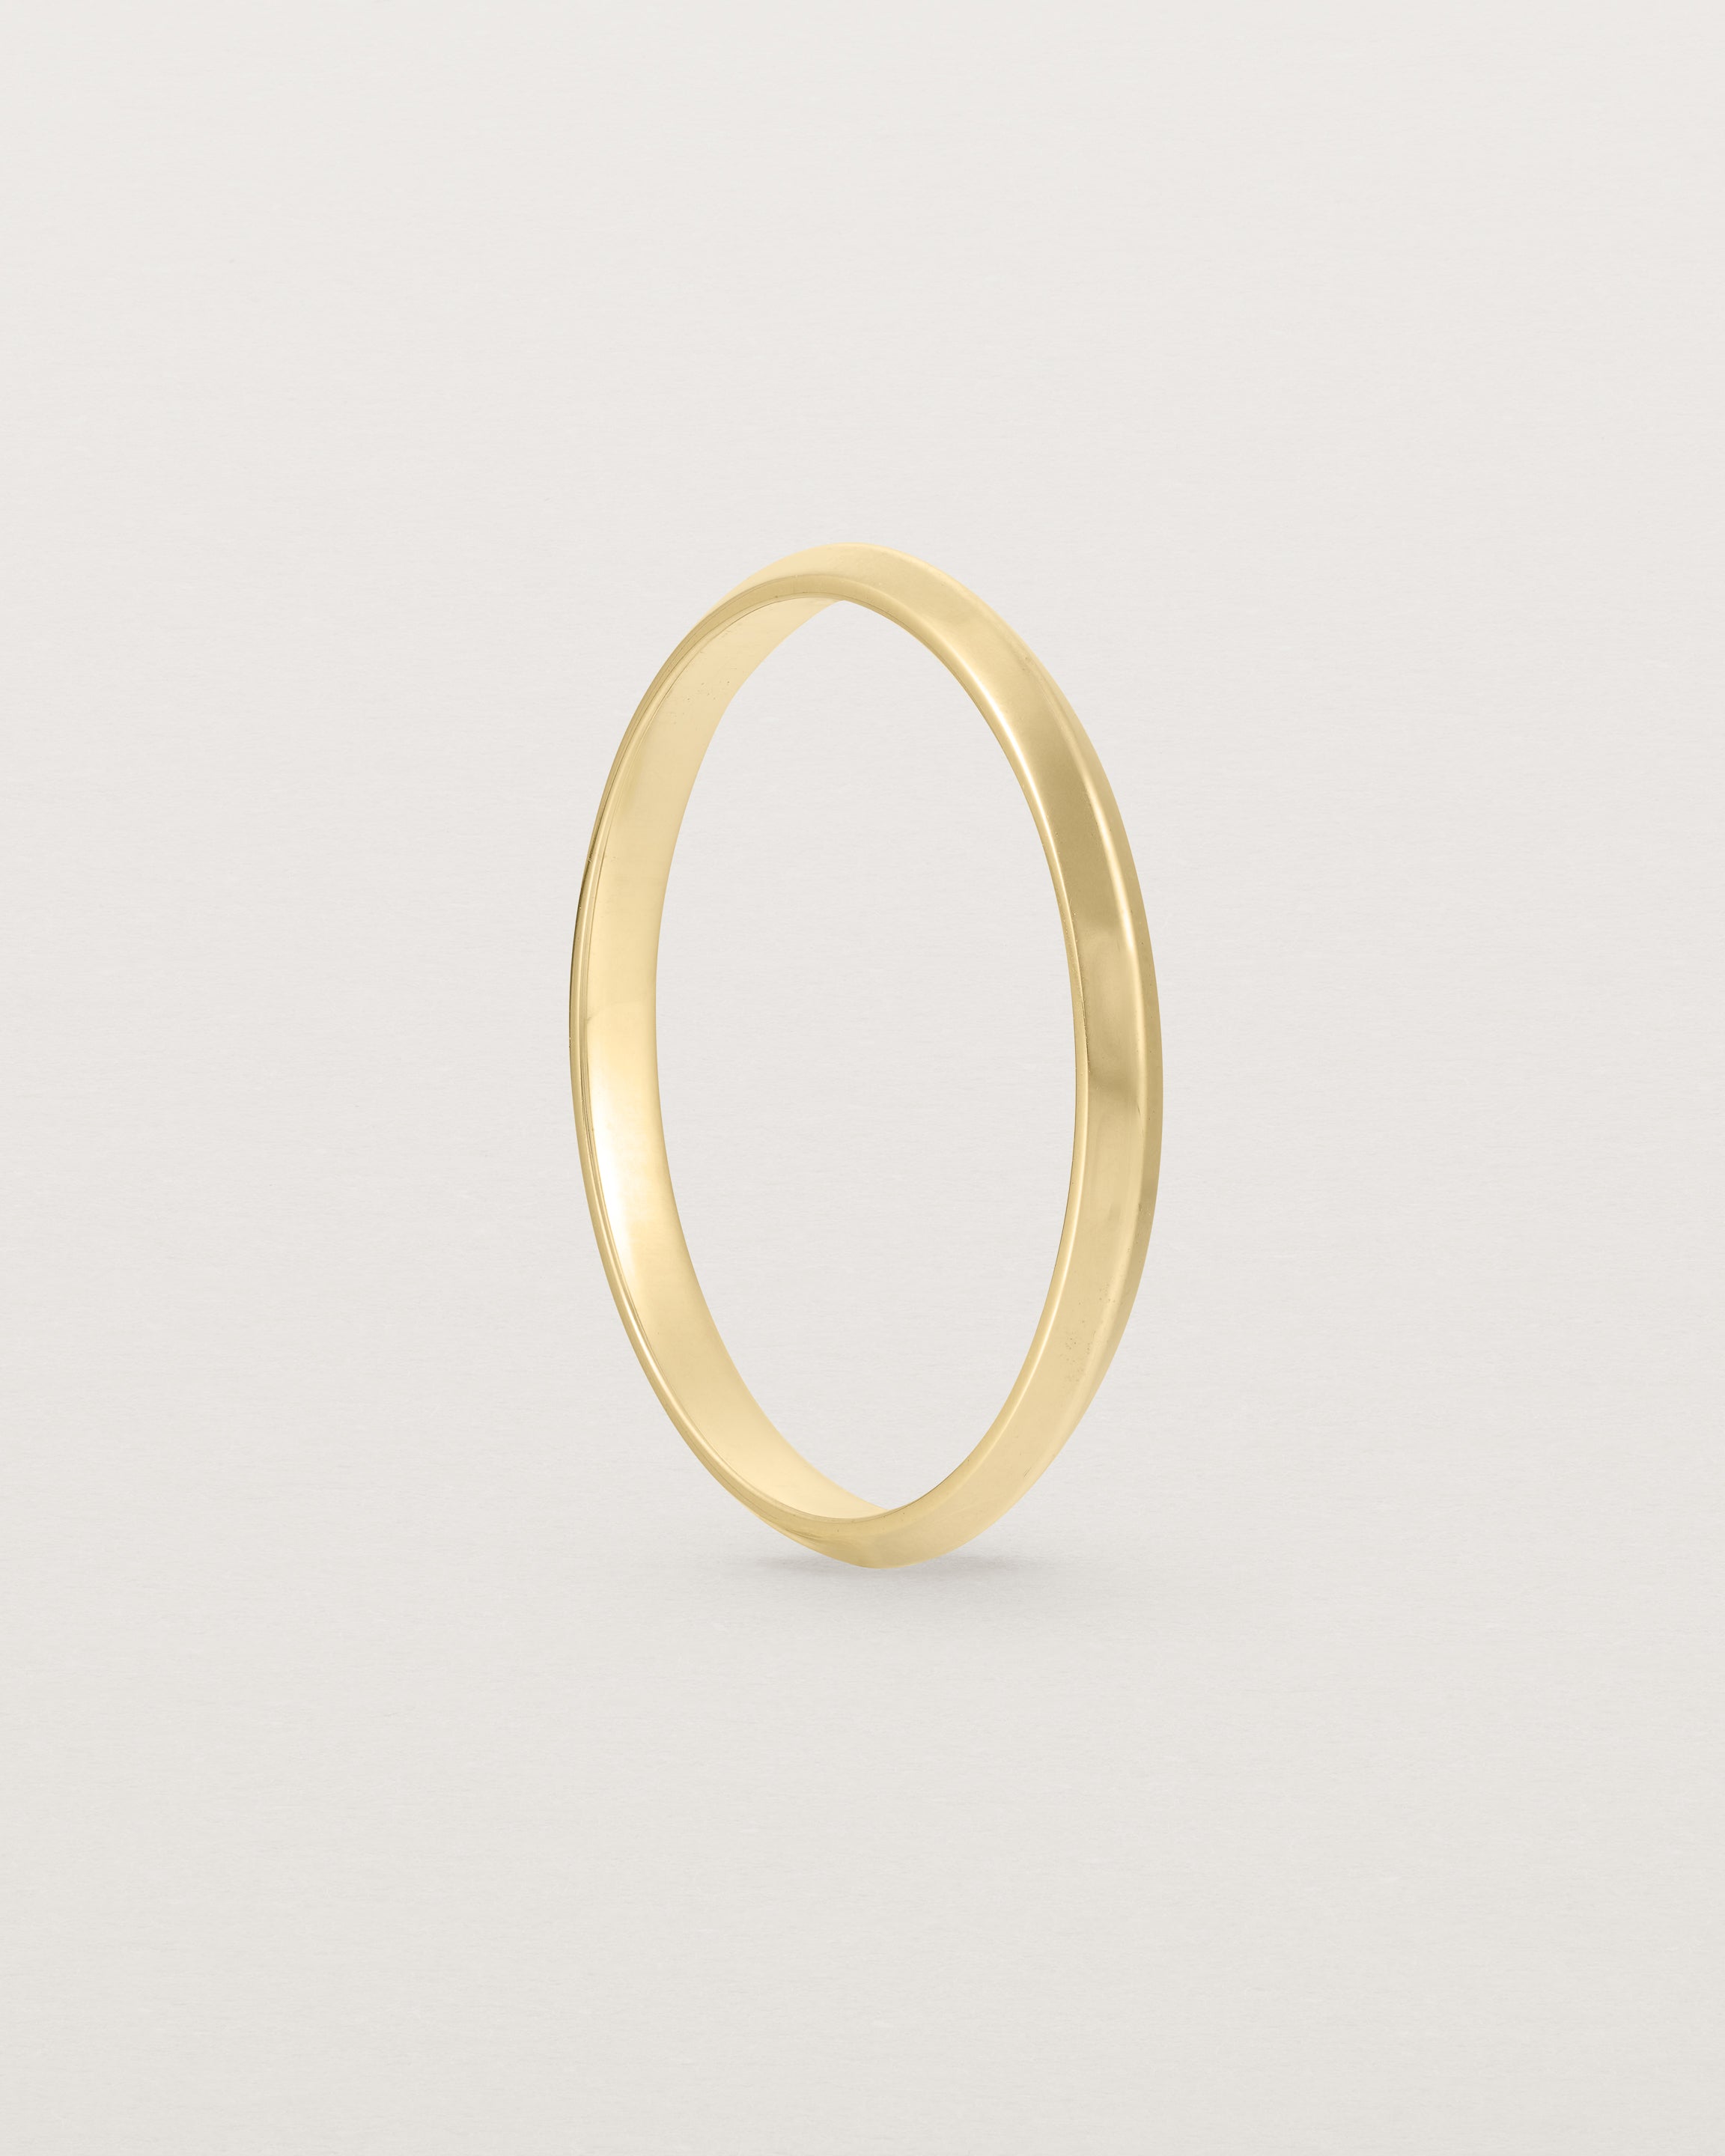 Standing view of the Knife Edge Wedding Ring | 2mm | Yellow Gold.